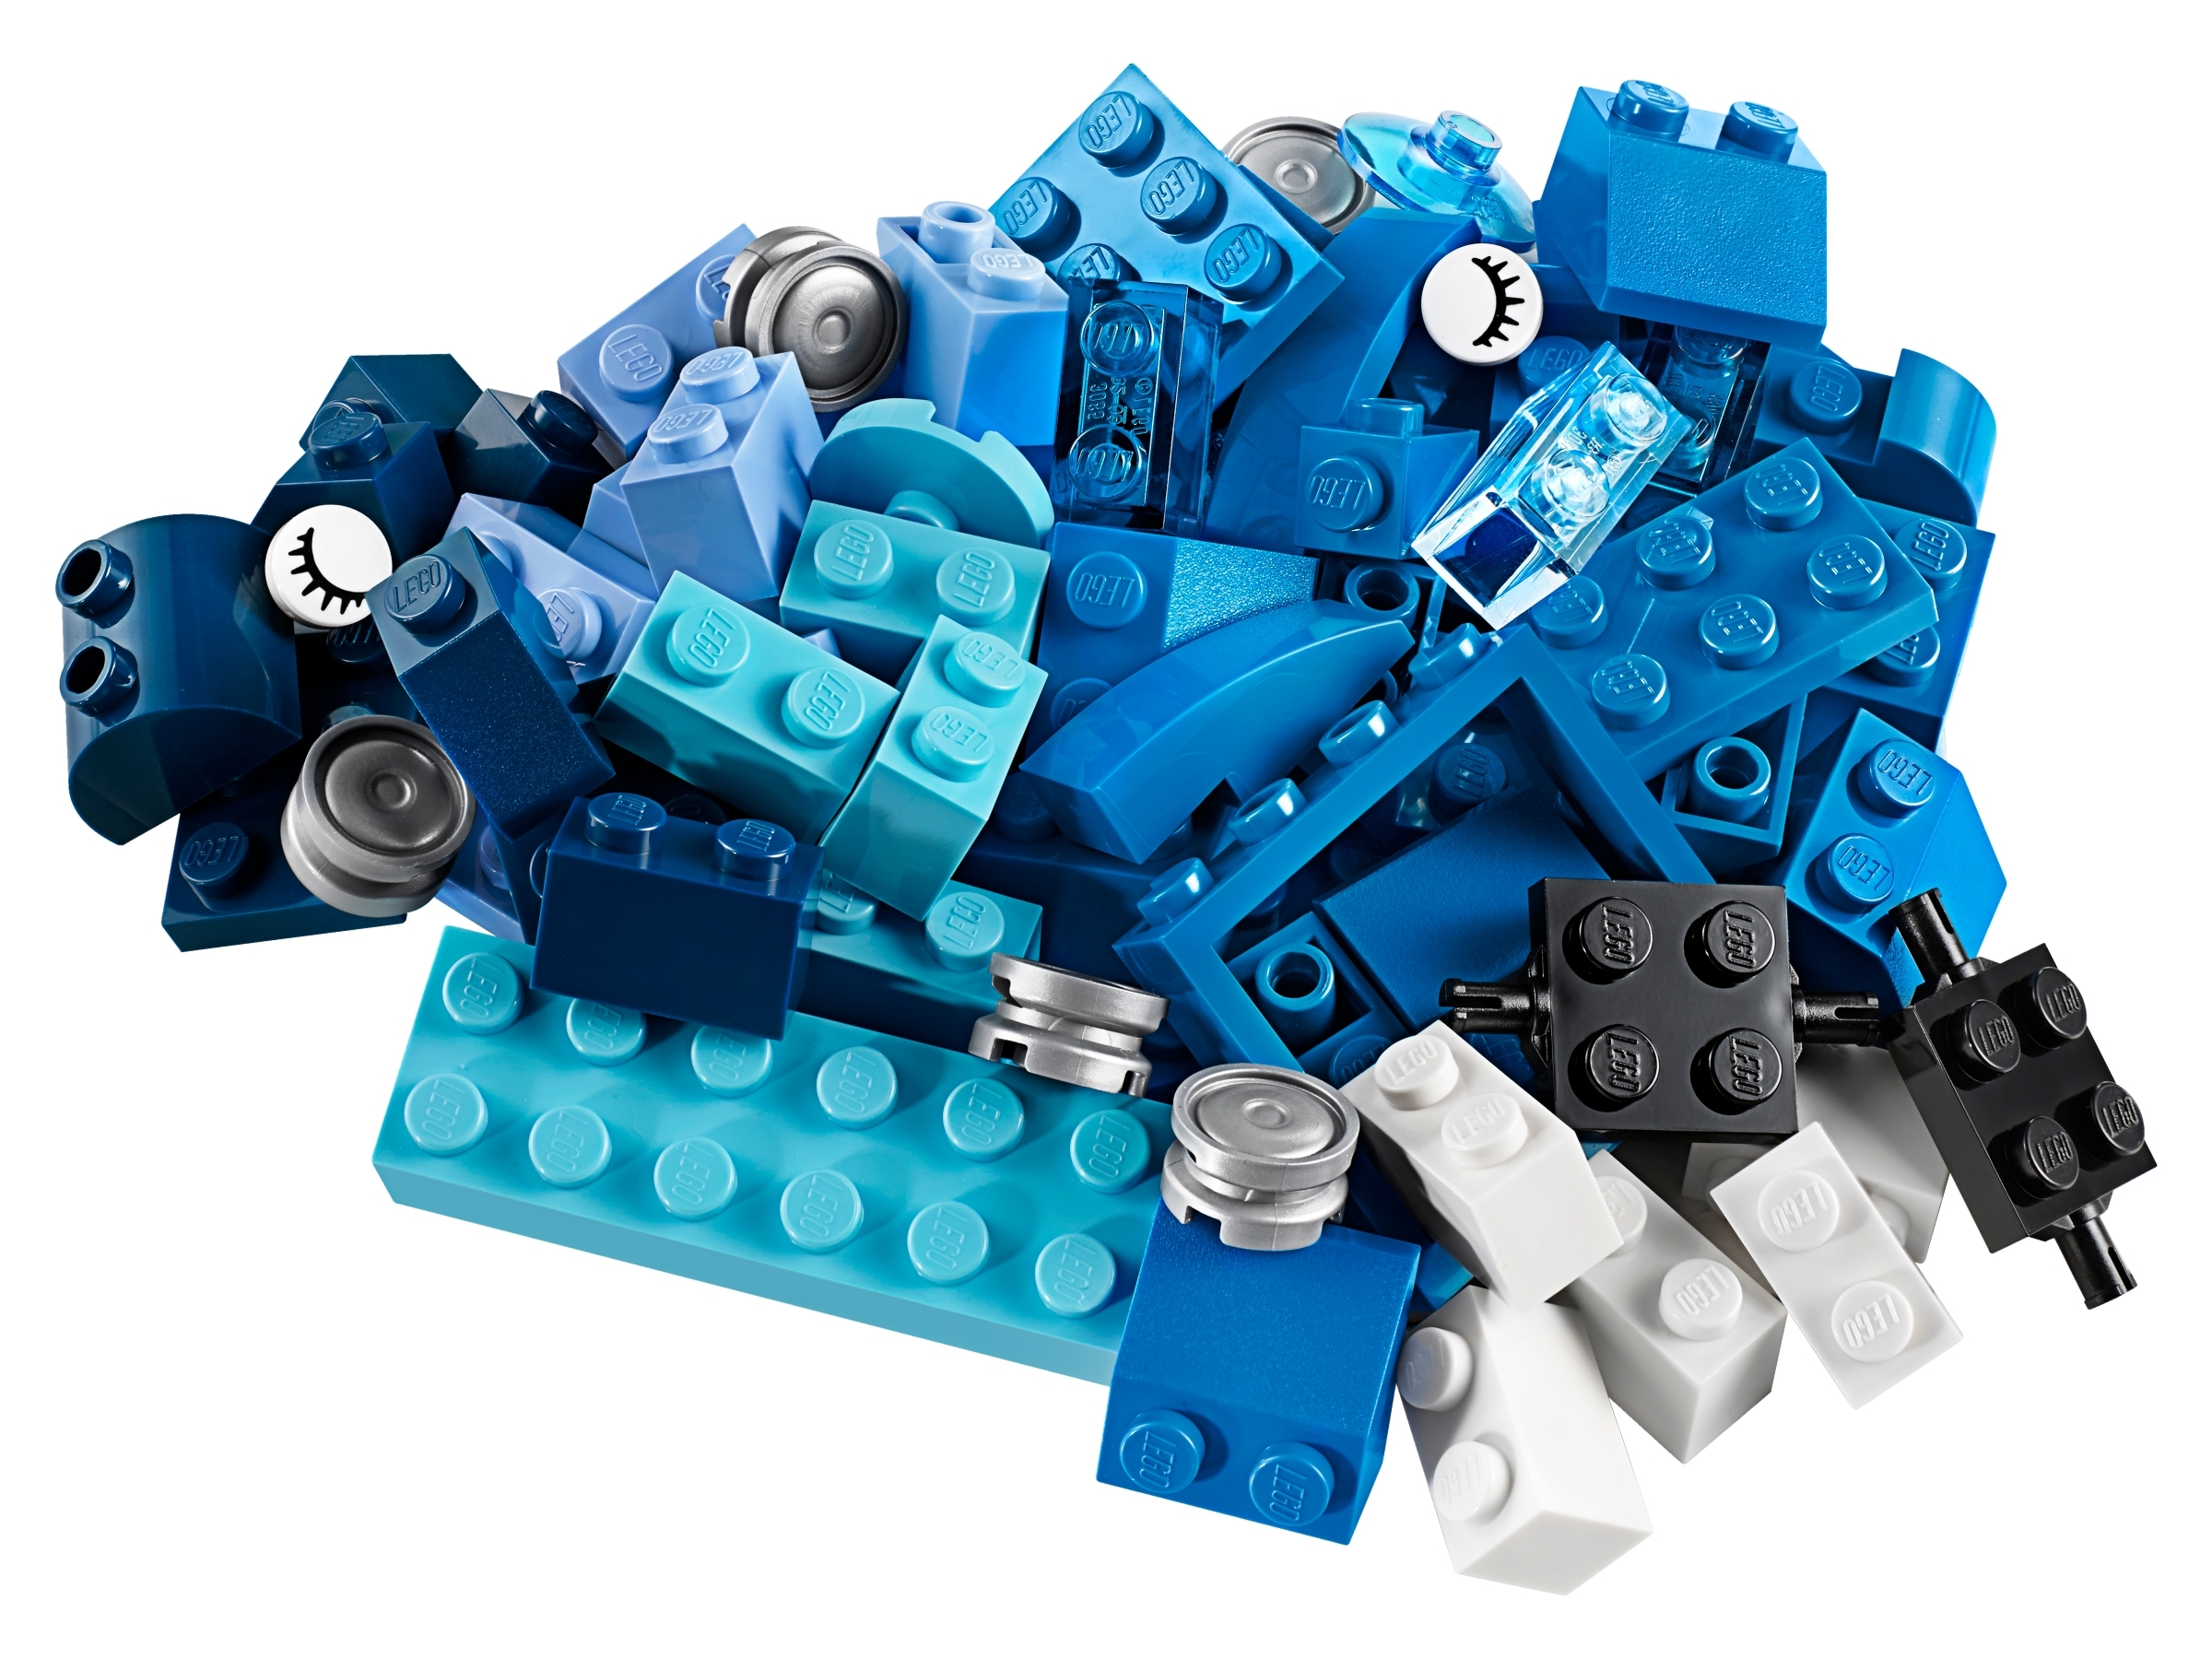 Blue Creativity Box 10706 | Classic Buy online at the Official LEGO® Shop US